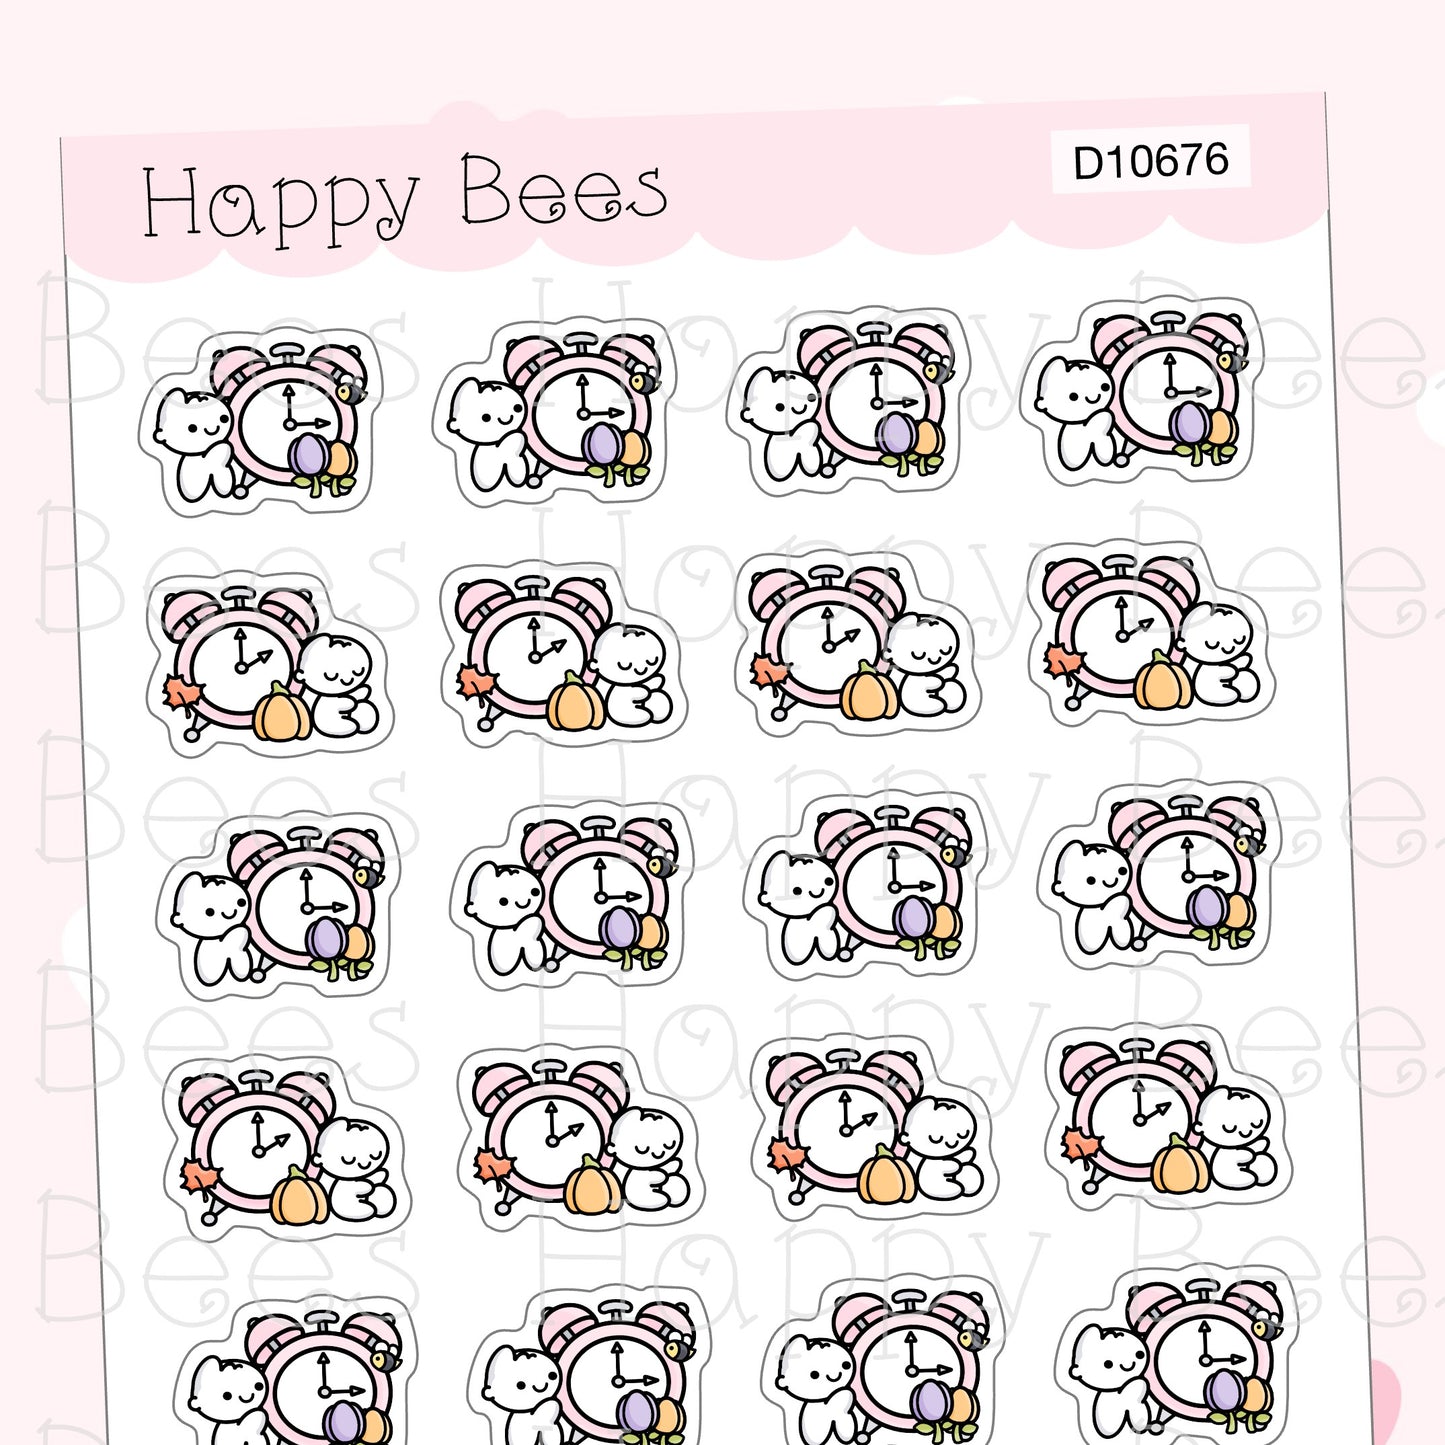 Spring Forward & Fall Back - Cute Doodles Functional Planner Stickers D10676